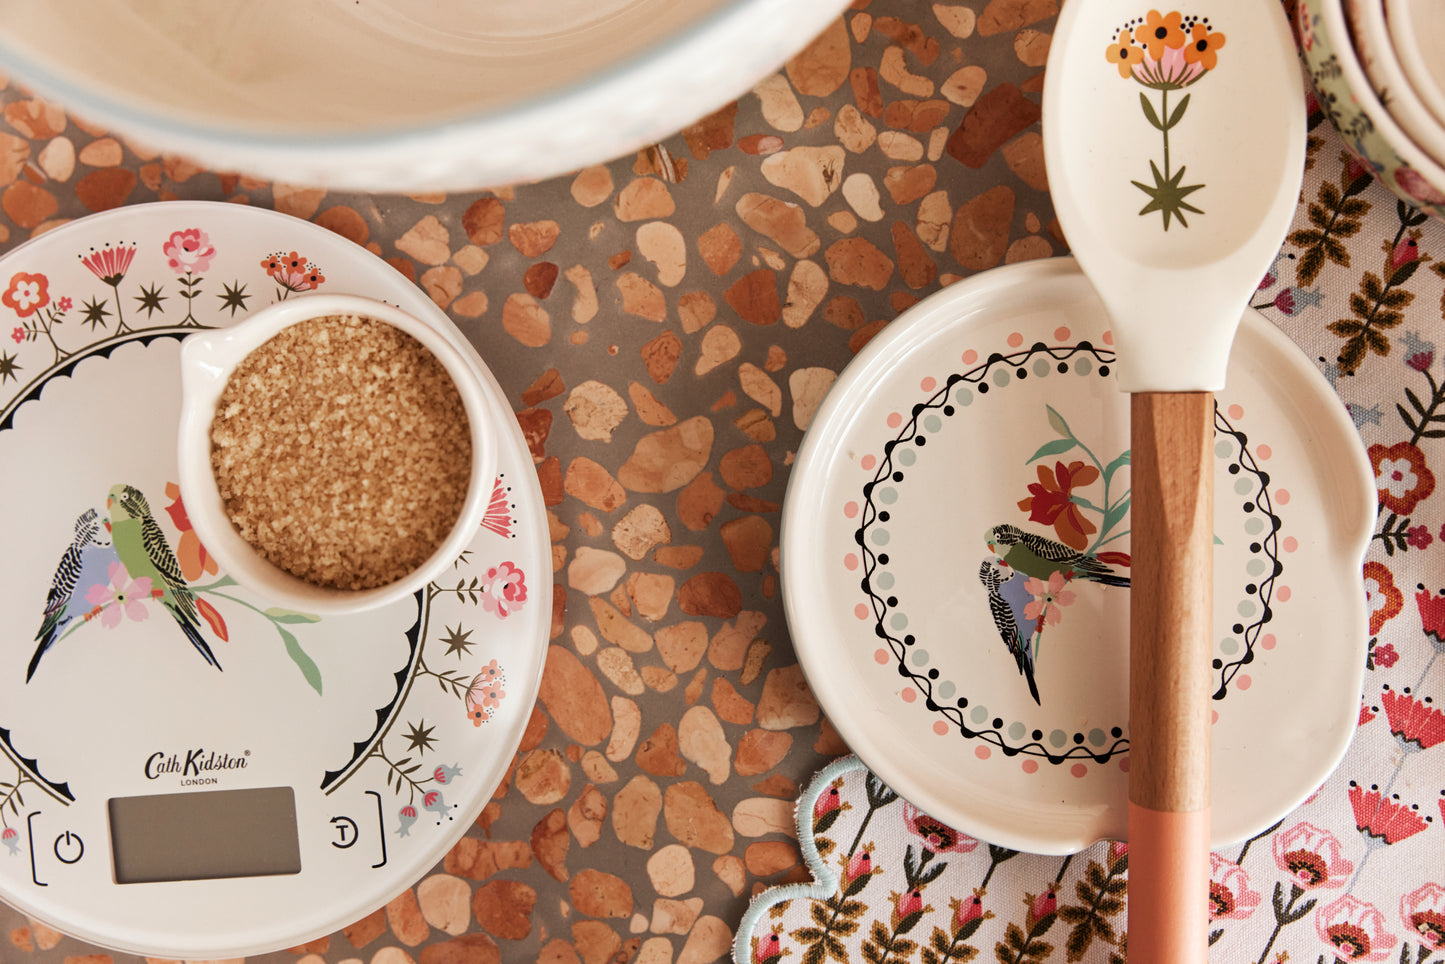 Cath Kidston Painted Table Ceramic Spoon Rest